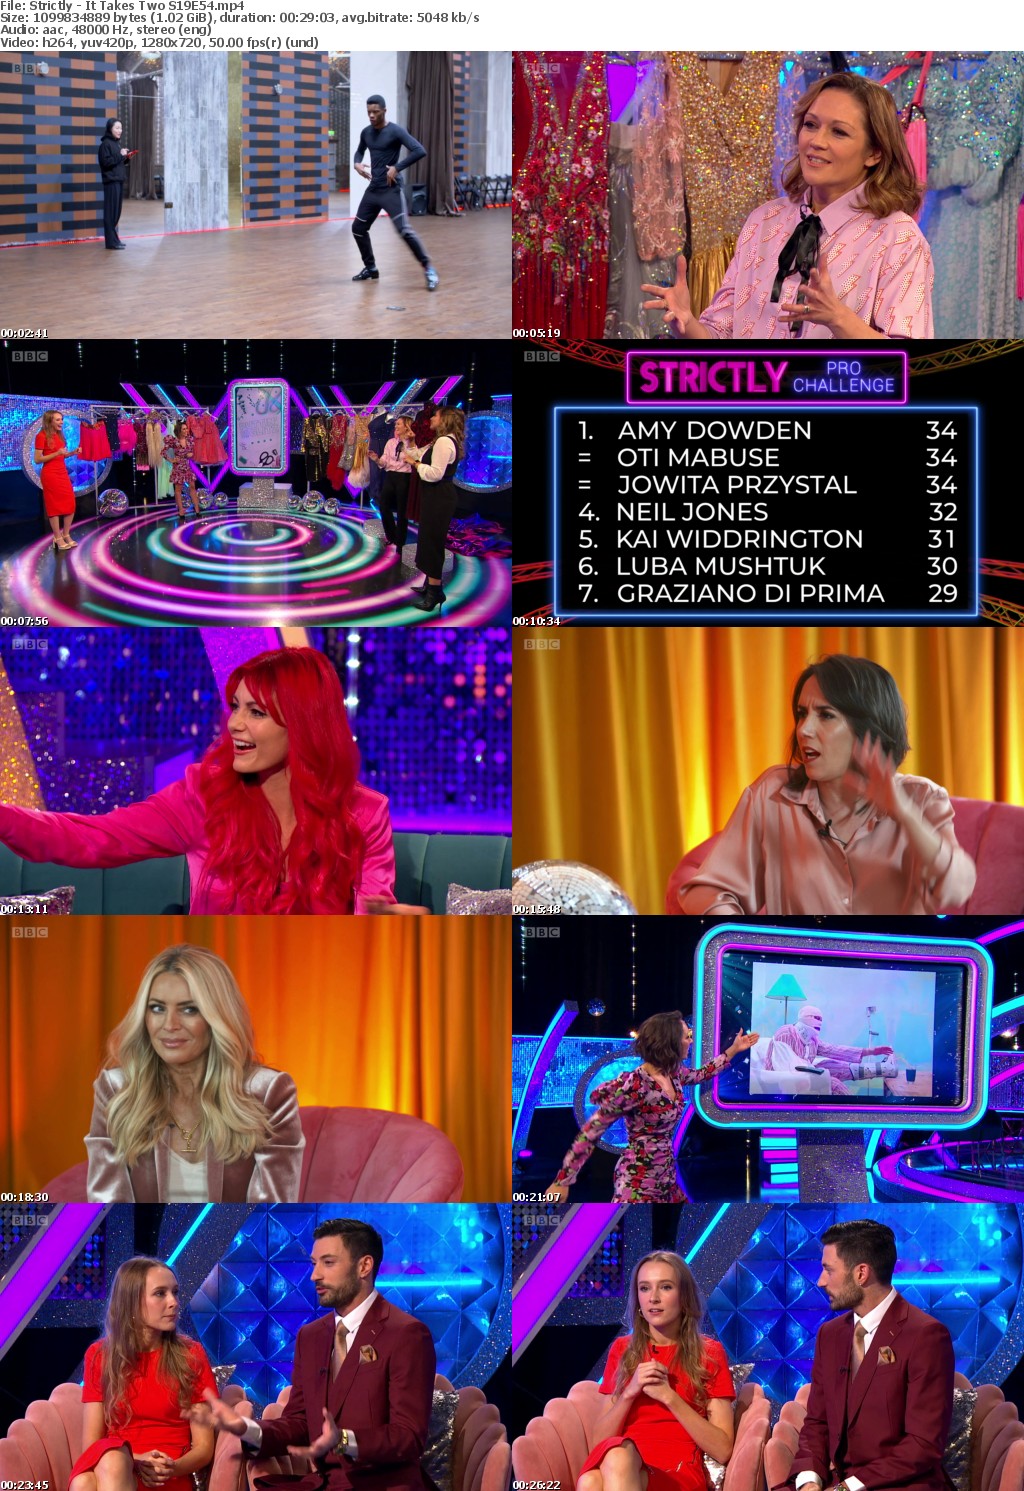 Strictly - It Takes Two S19E54 (1280x720p HD, 50fps, soft Eng subs)